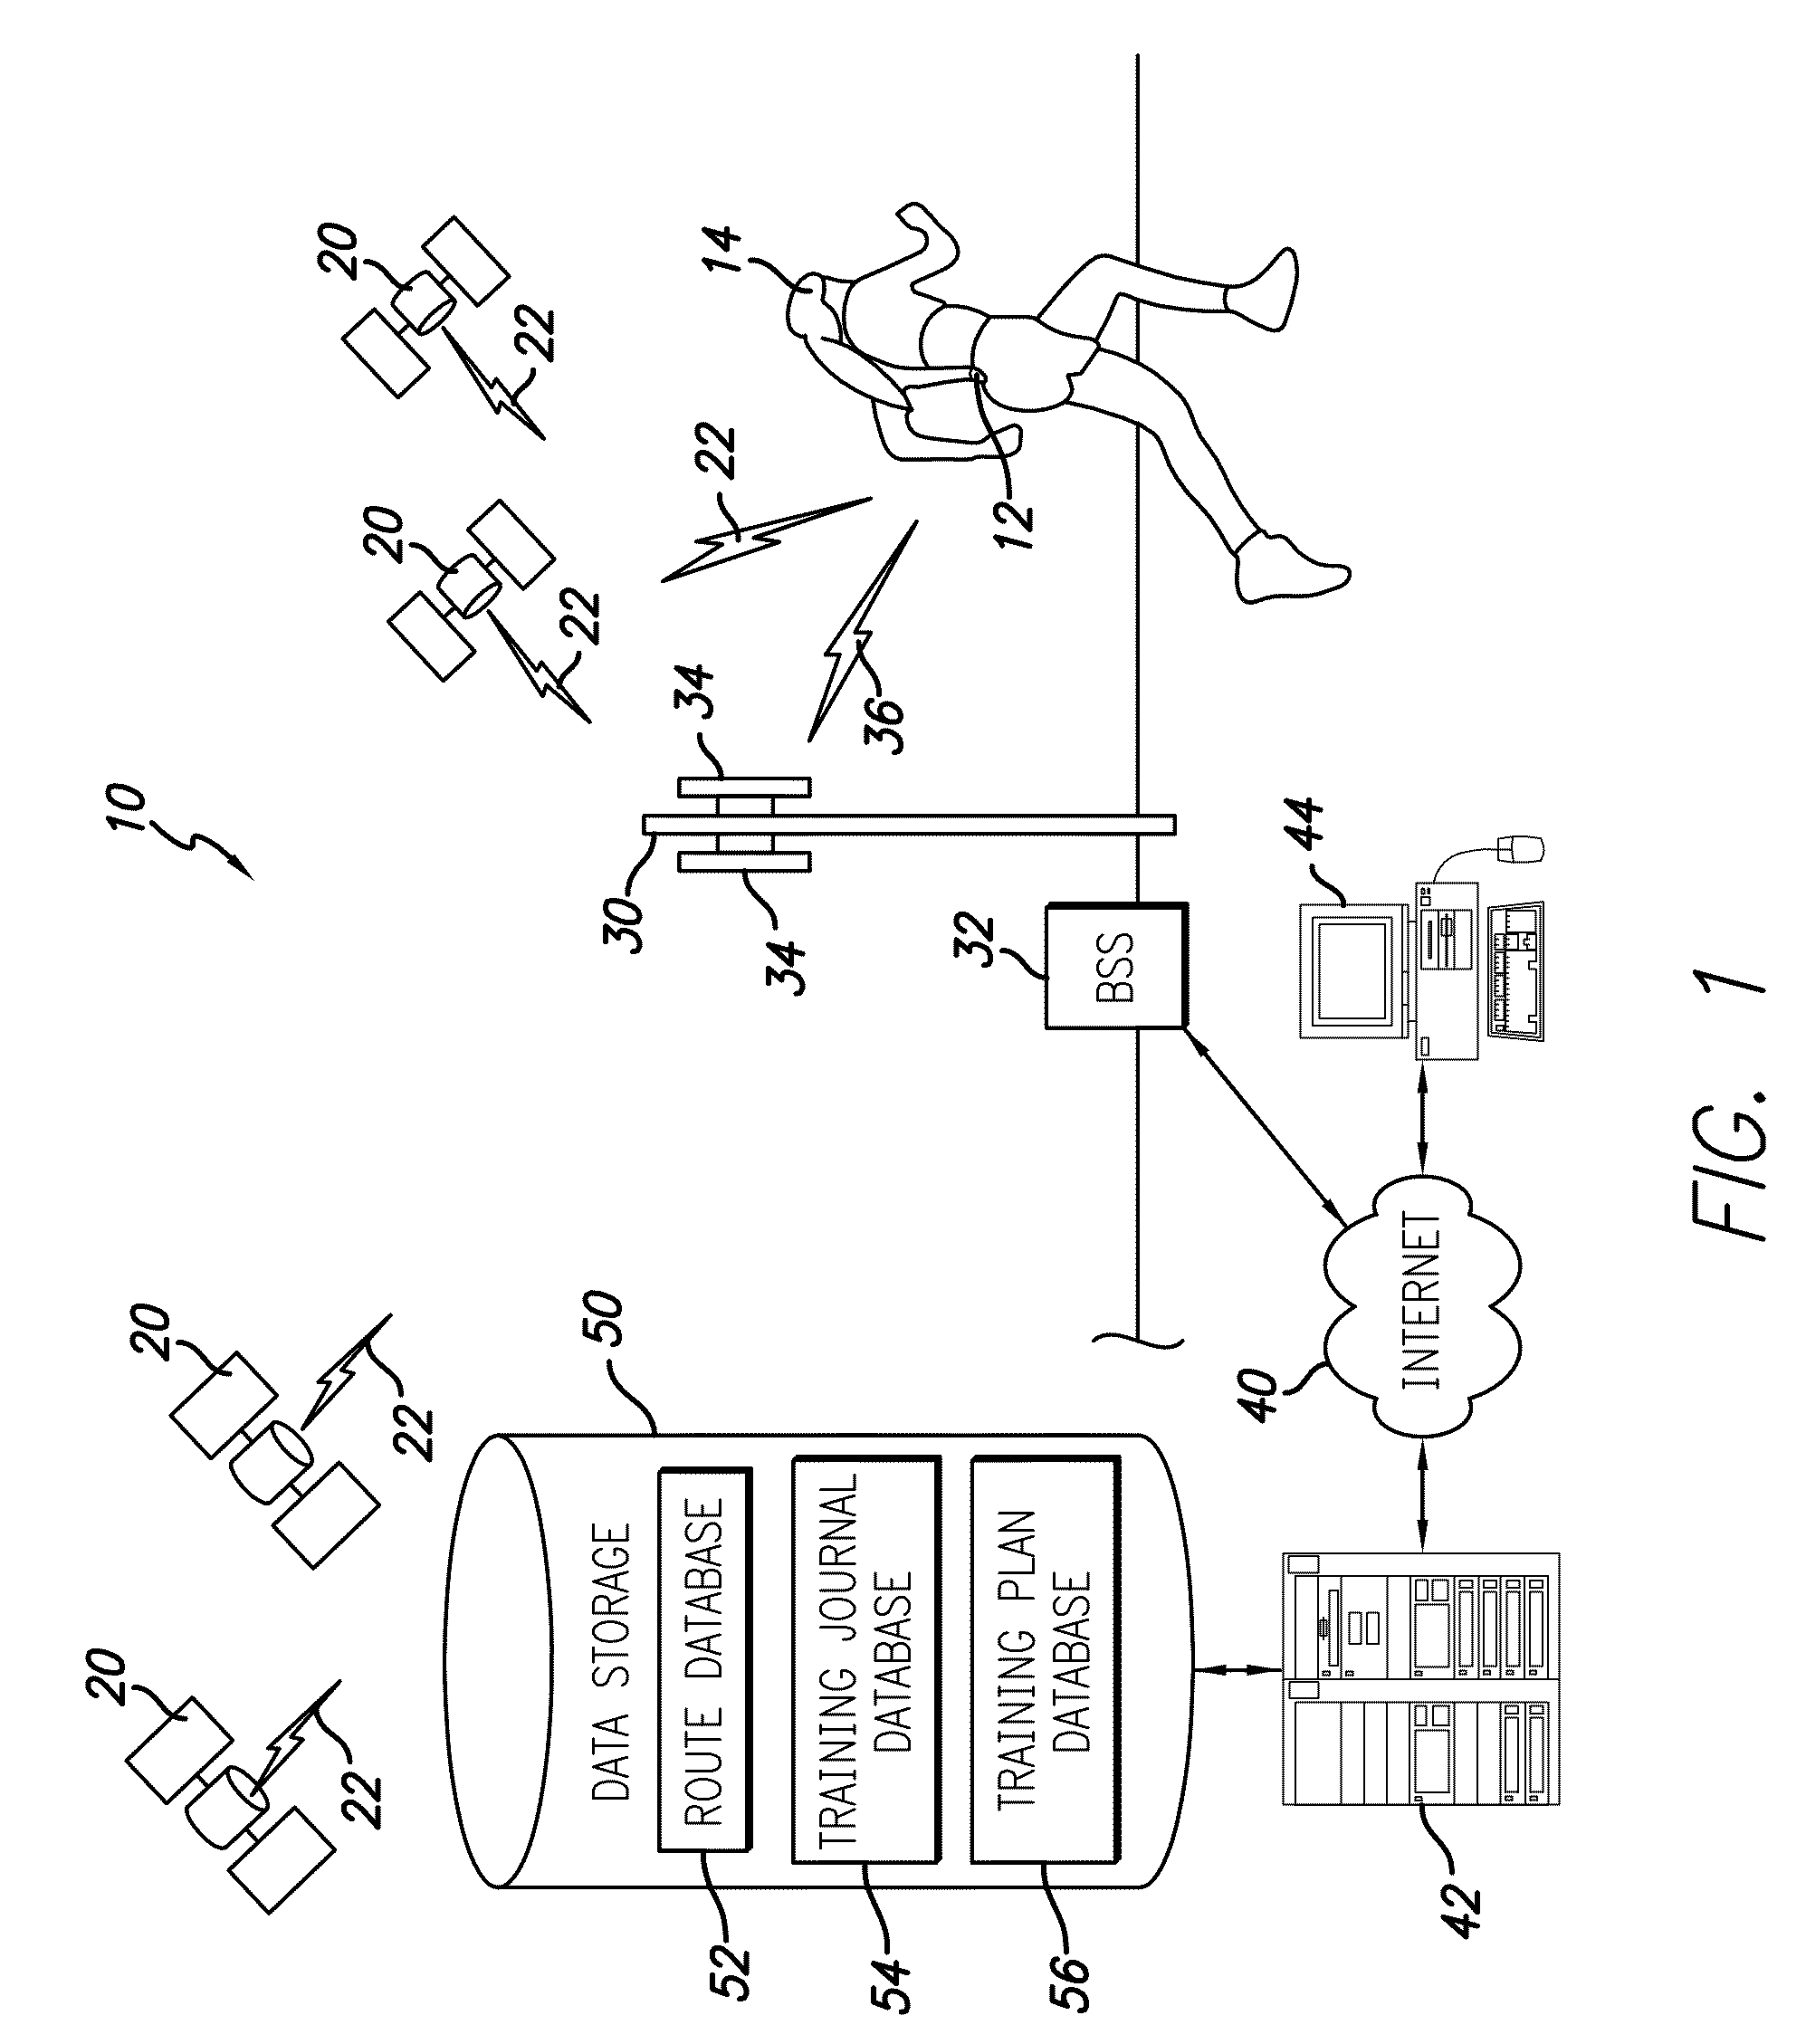 Program Products, Methods, and Systems for Providing Location-Aware Fitness Monitoring Services